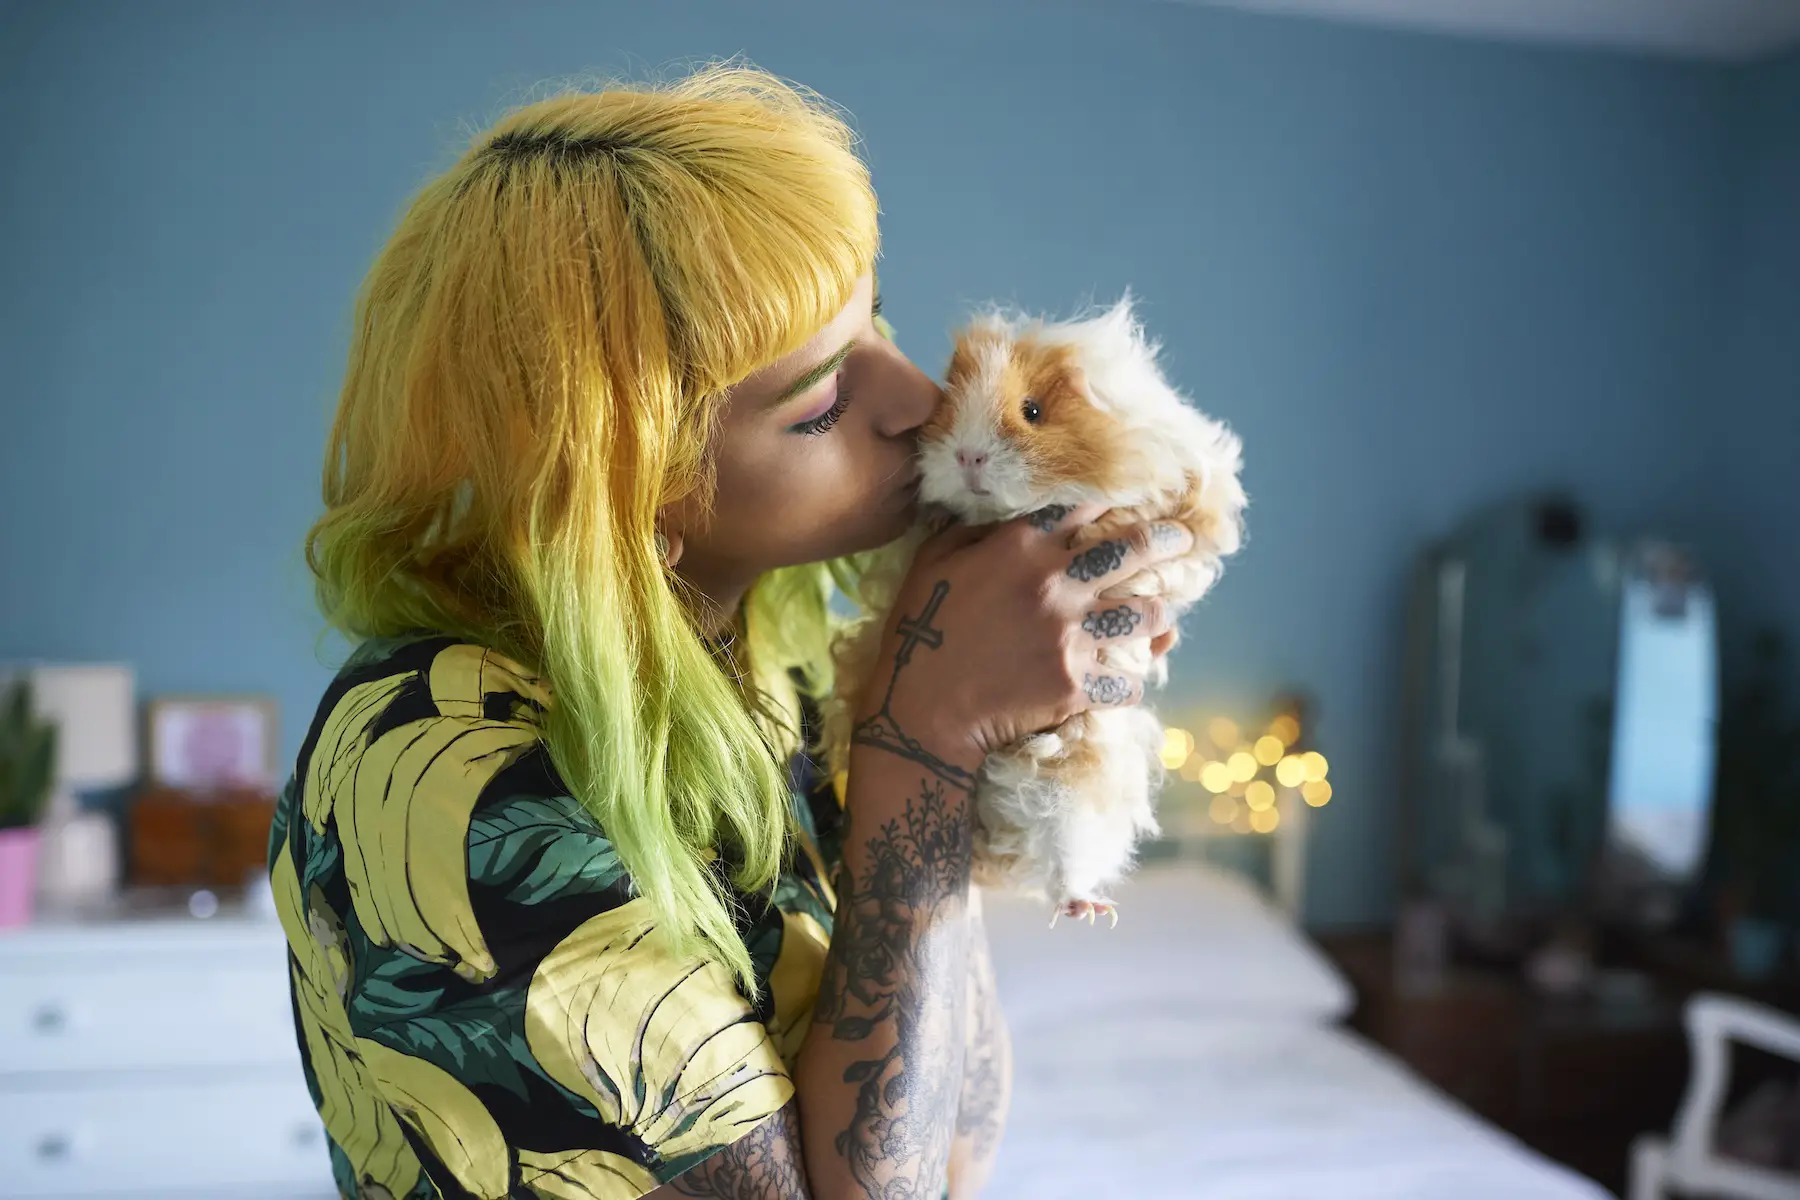 A woman with tattoos and dyed hair holds up her fluffy white and orange guinea pig to kiss its cheek.